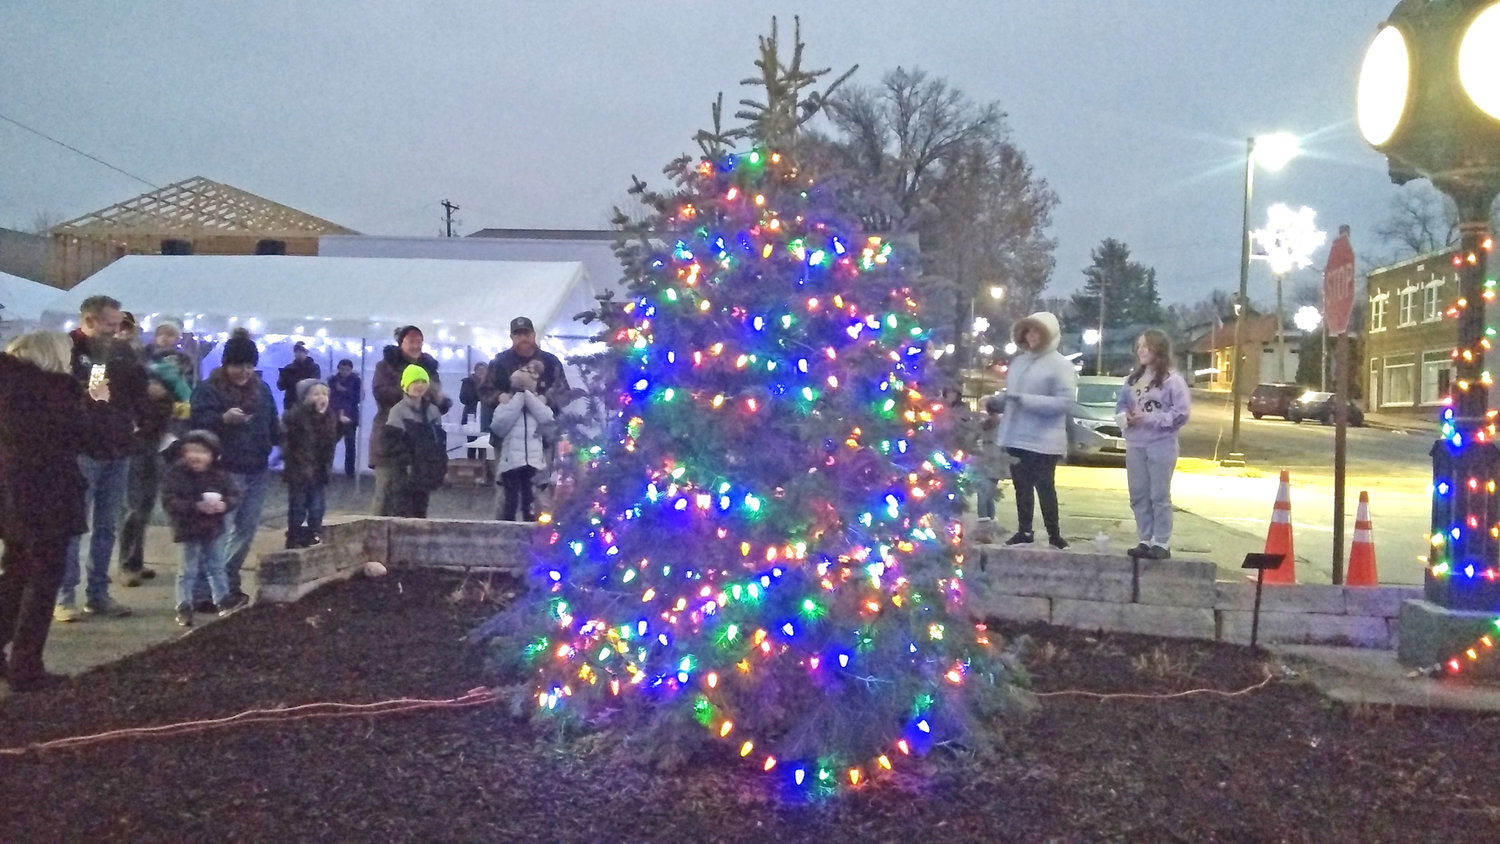 At 5 p.m. on the dot, Wellman’s downtown Christmas tree was lit up for the season.